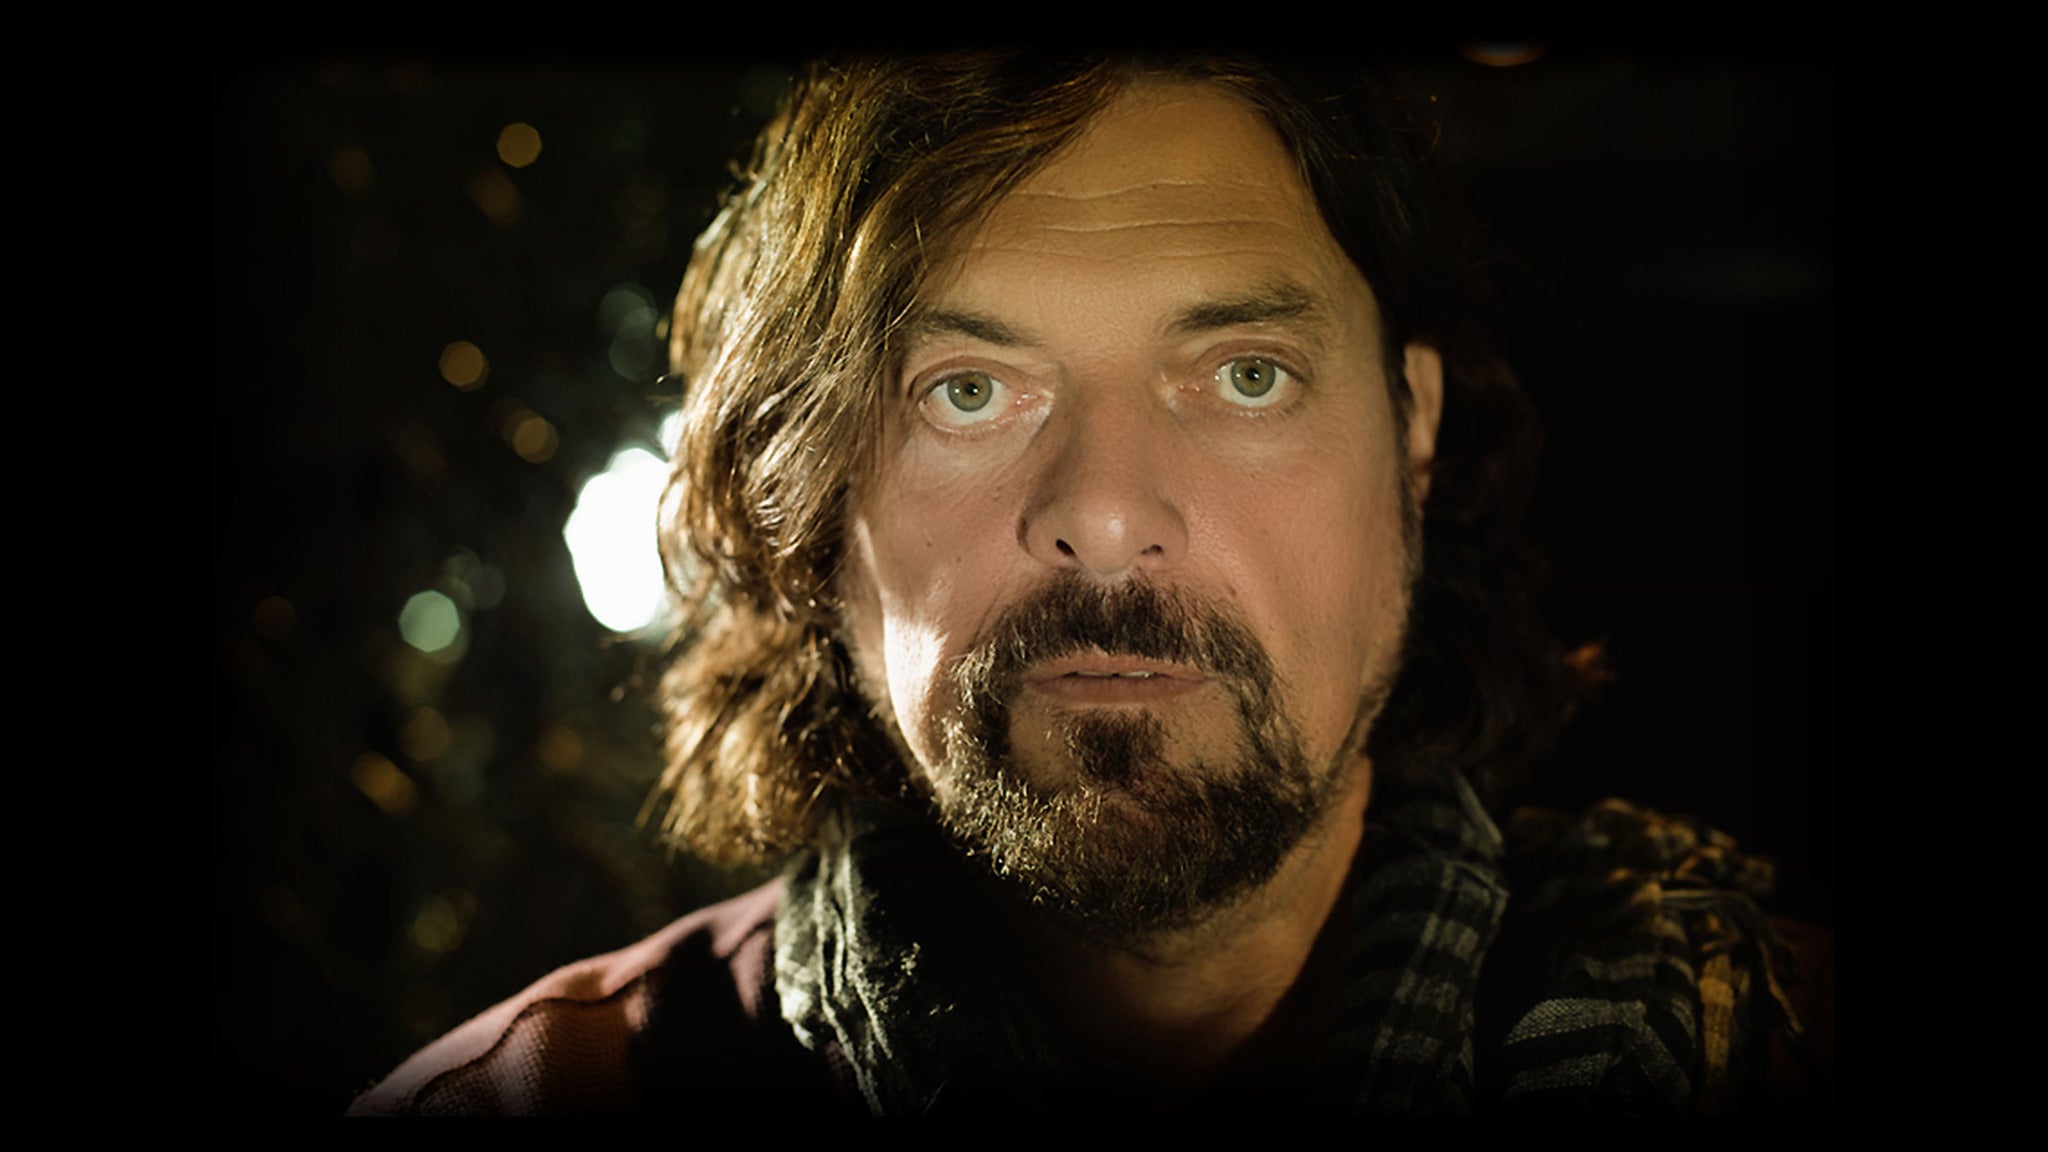 The Alan Parsons Live Project in Las Vegas promo photo for The Alan Parsons Live Project presale offer code